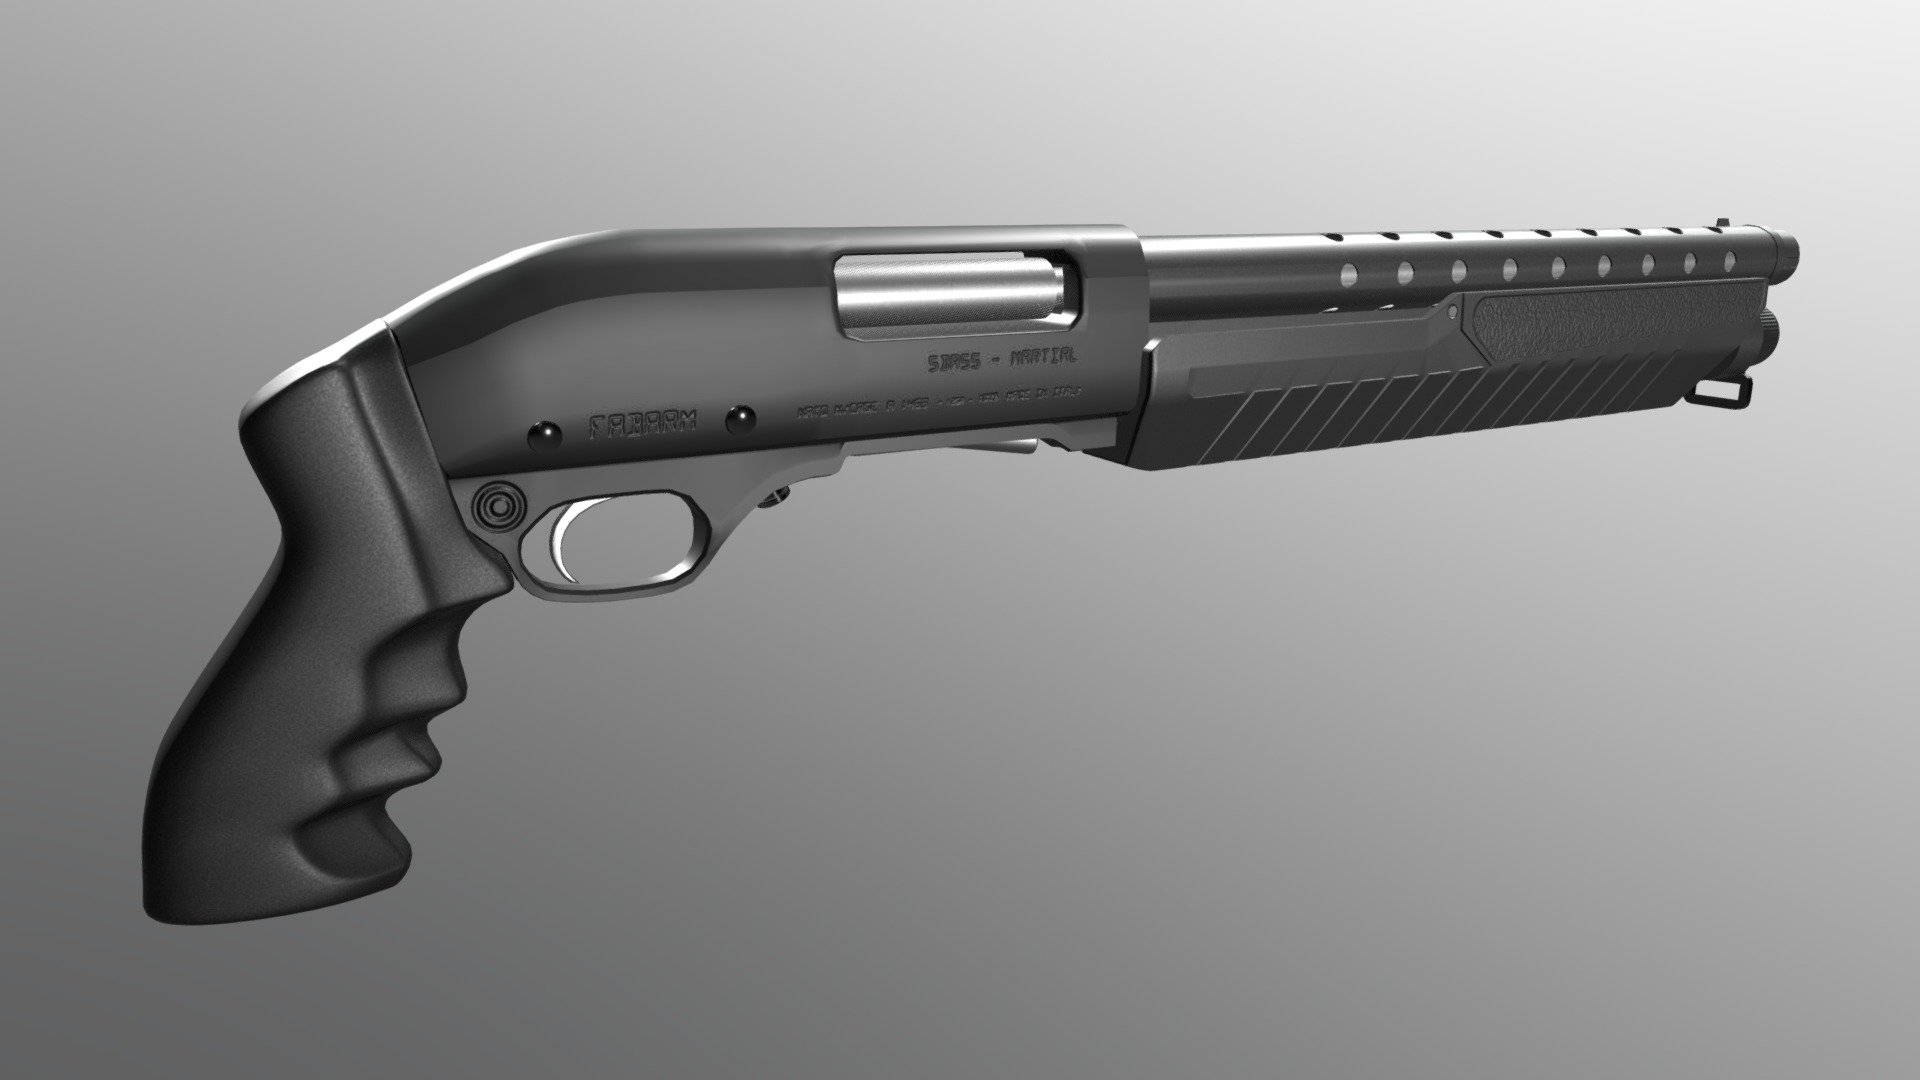 ShotGun made for Unreal Project in 8 hours with Maya and Substance Painter - ShotGun - 3D model by Camille Bougeard (@cambd) 3d model